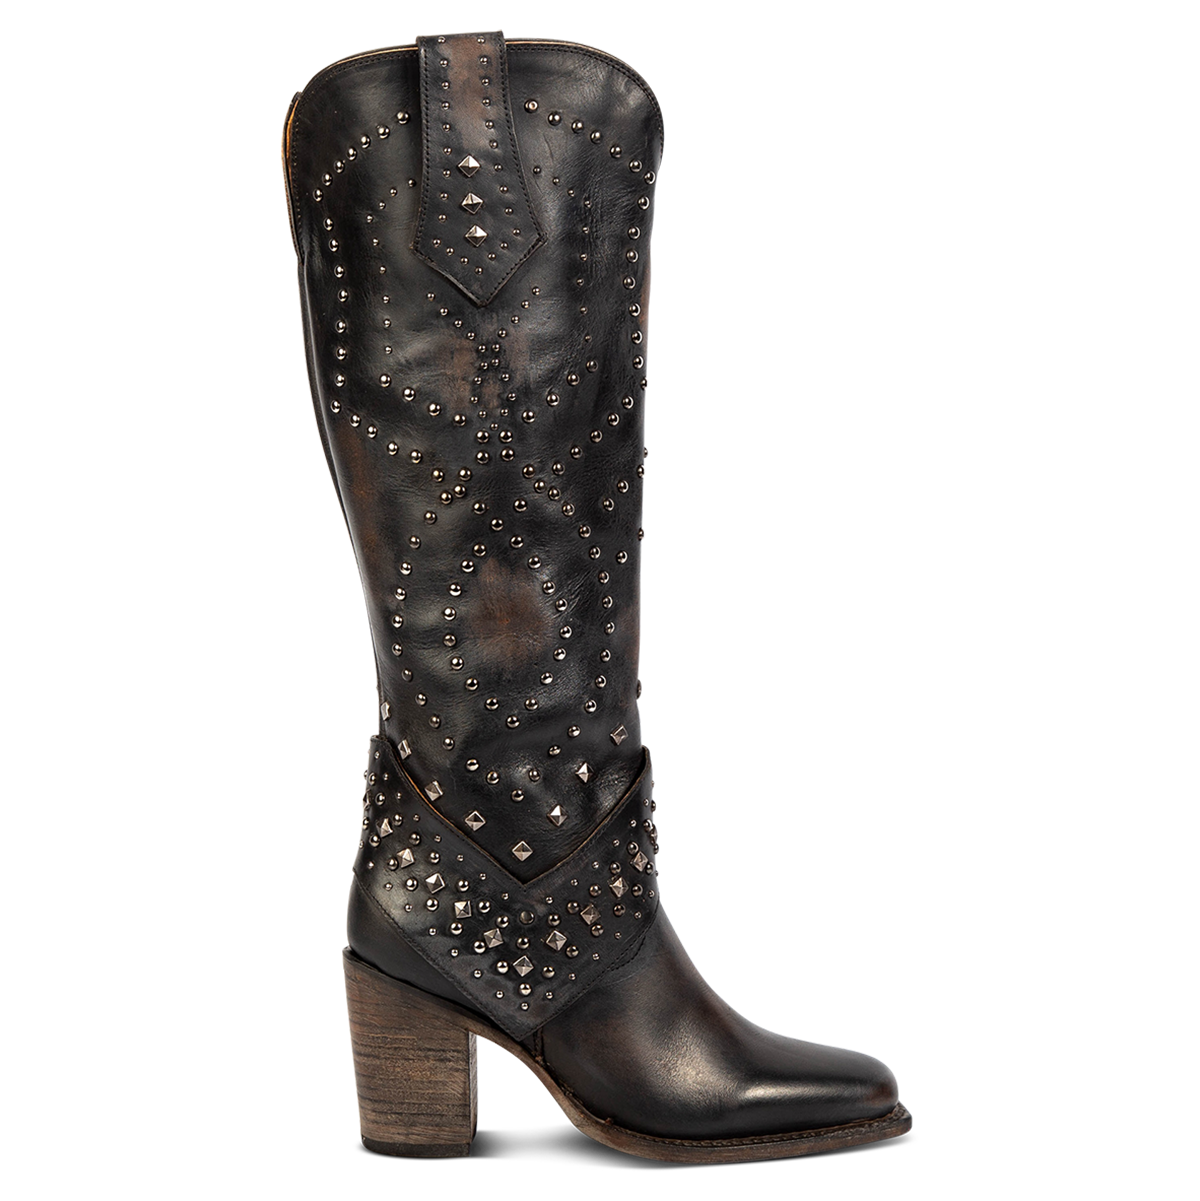 FREEBIRD women's Pamela black leather boot with silver stud embellishments detailing the shaft, inside working brass zipper and stacked heel